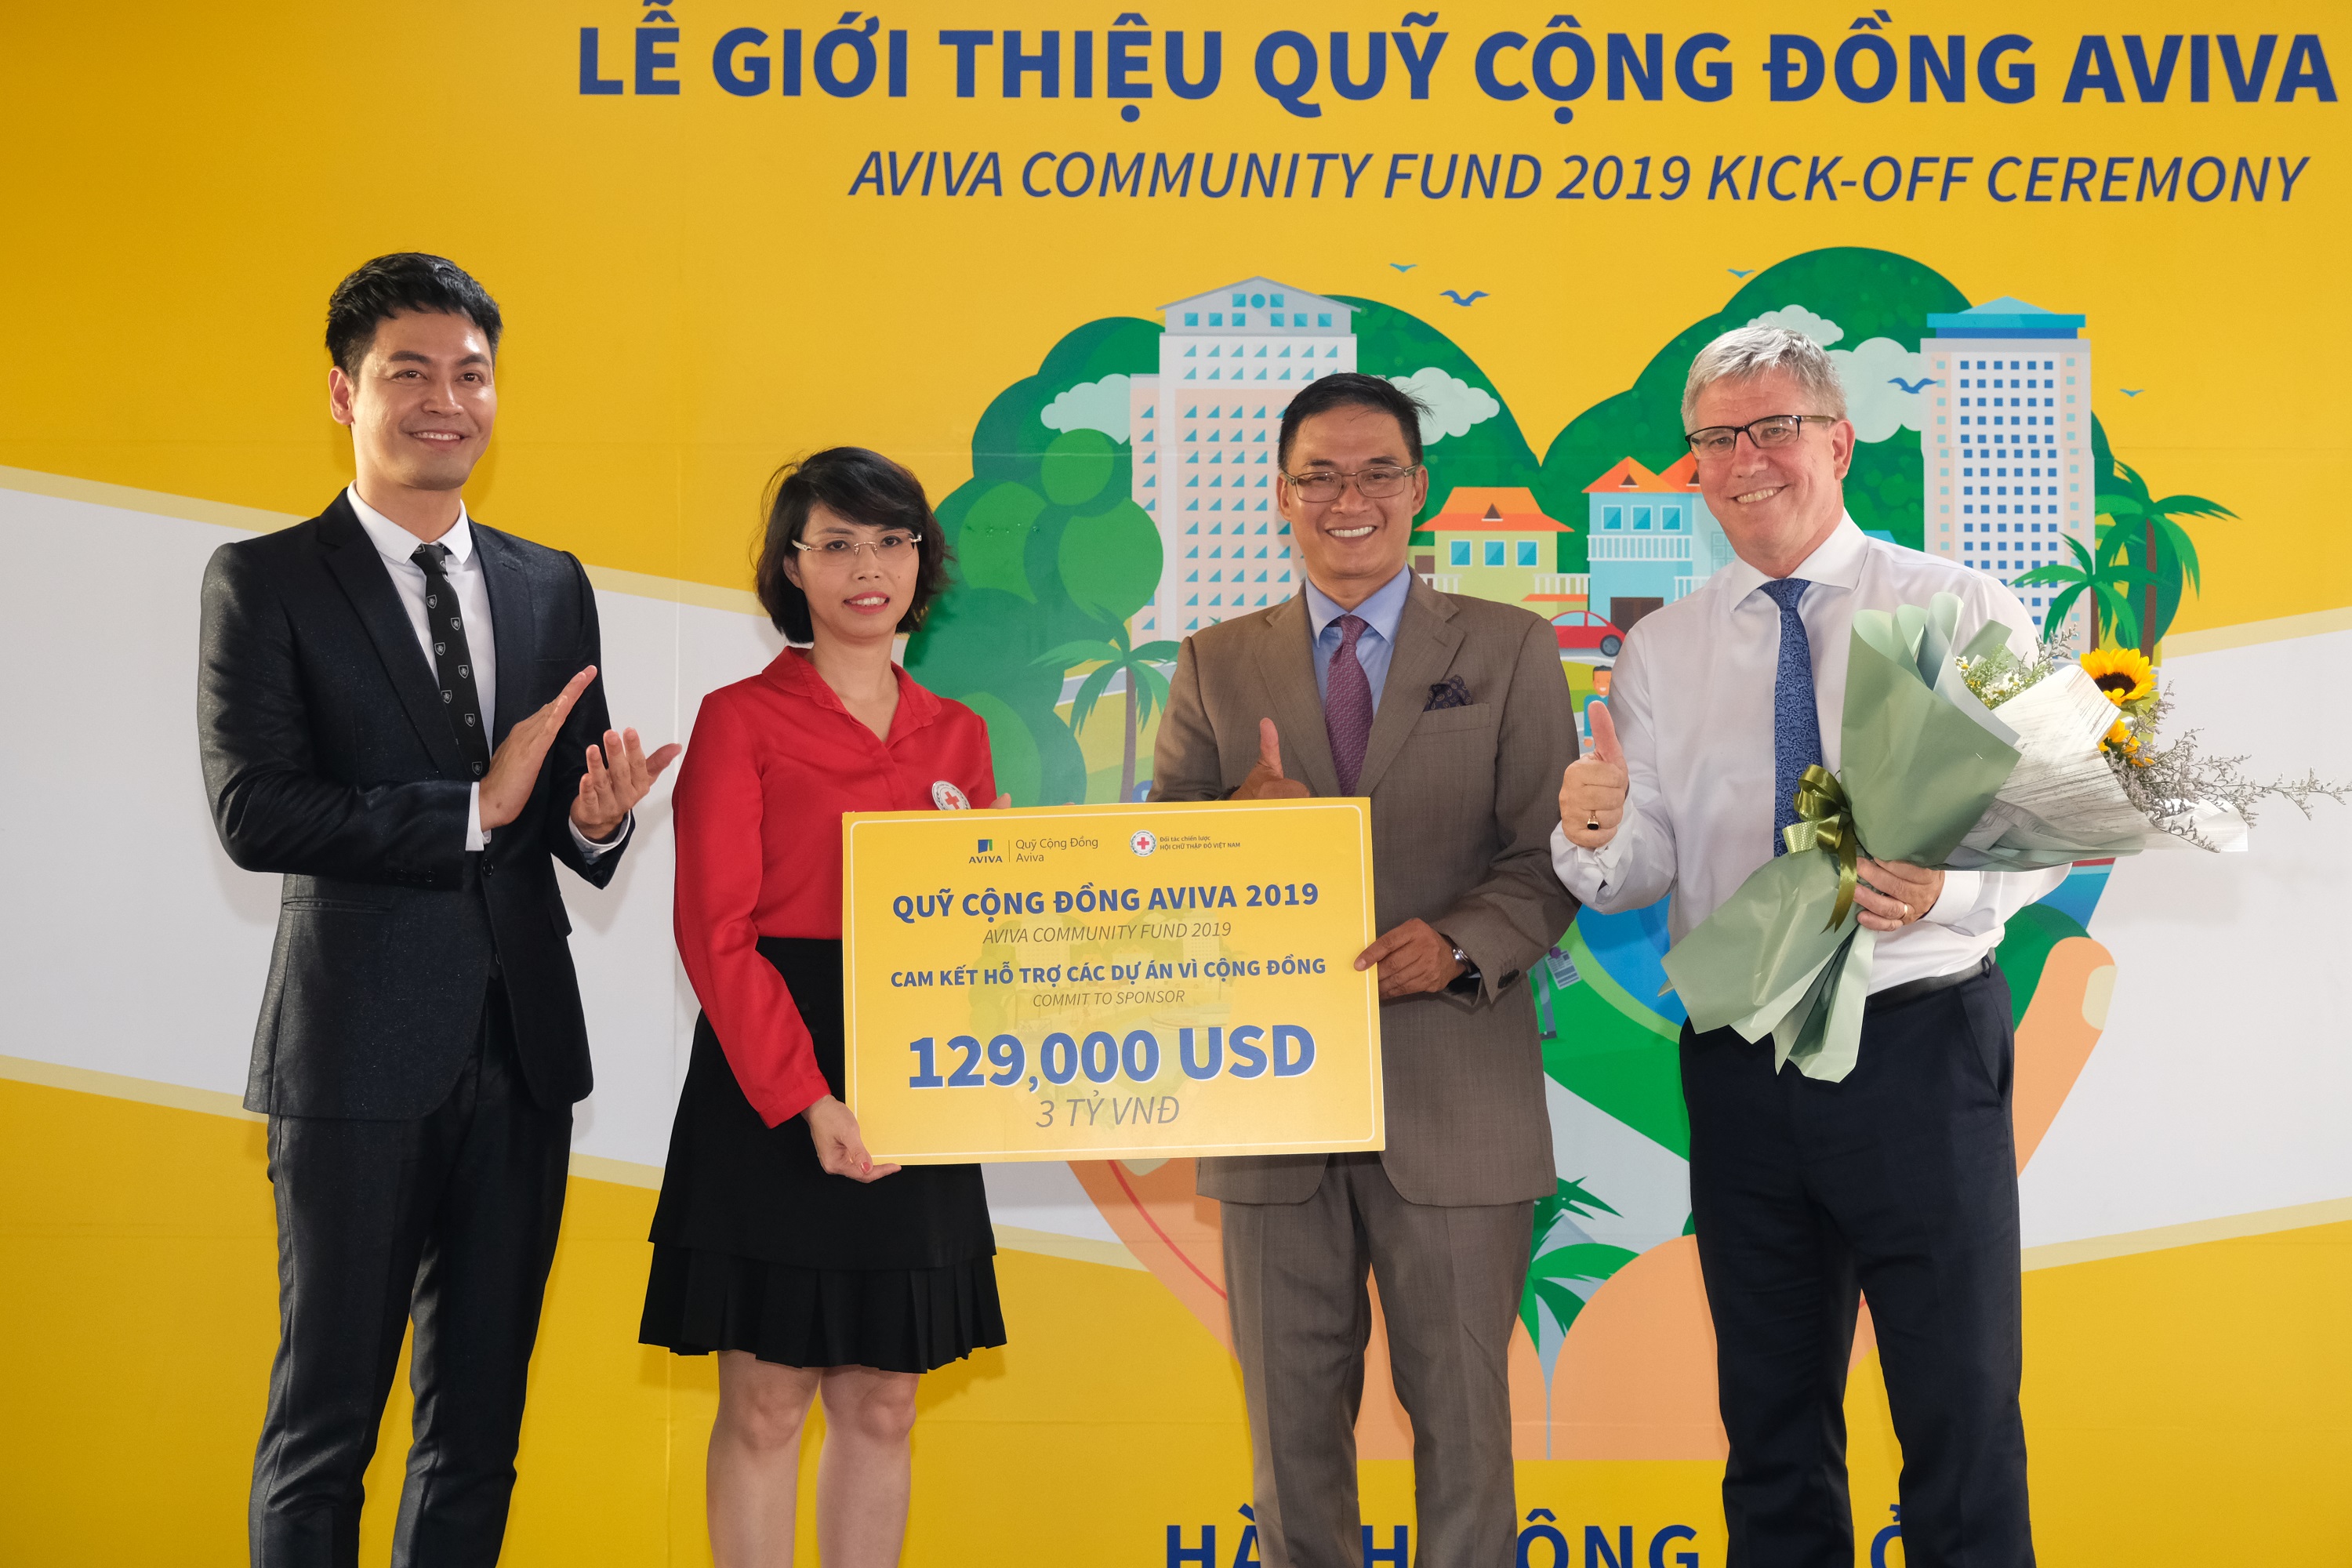 Fund with grants totaling $129,000 launched to help Vietnamese community projects